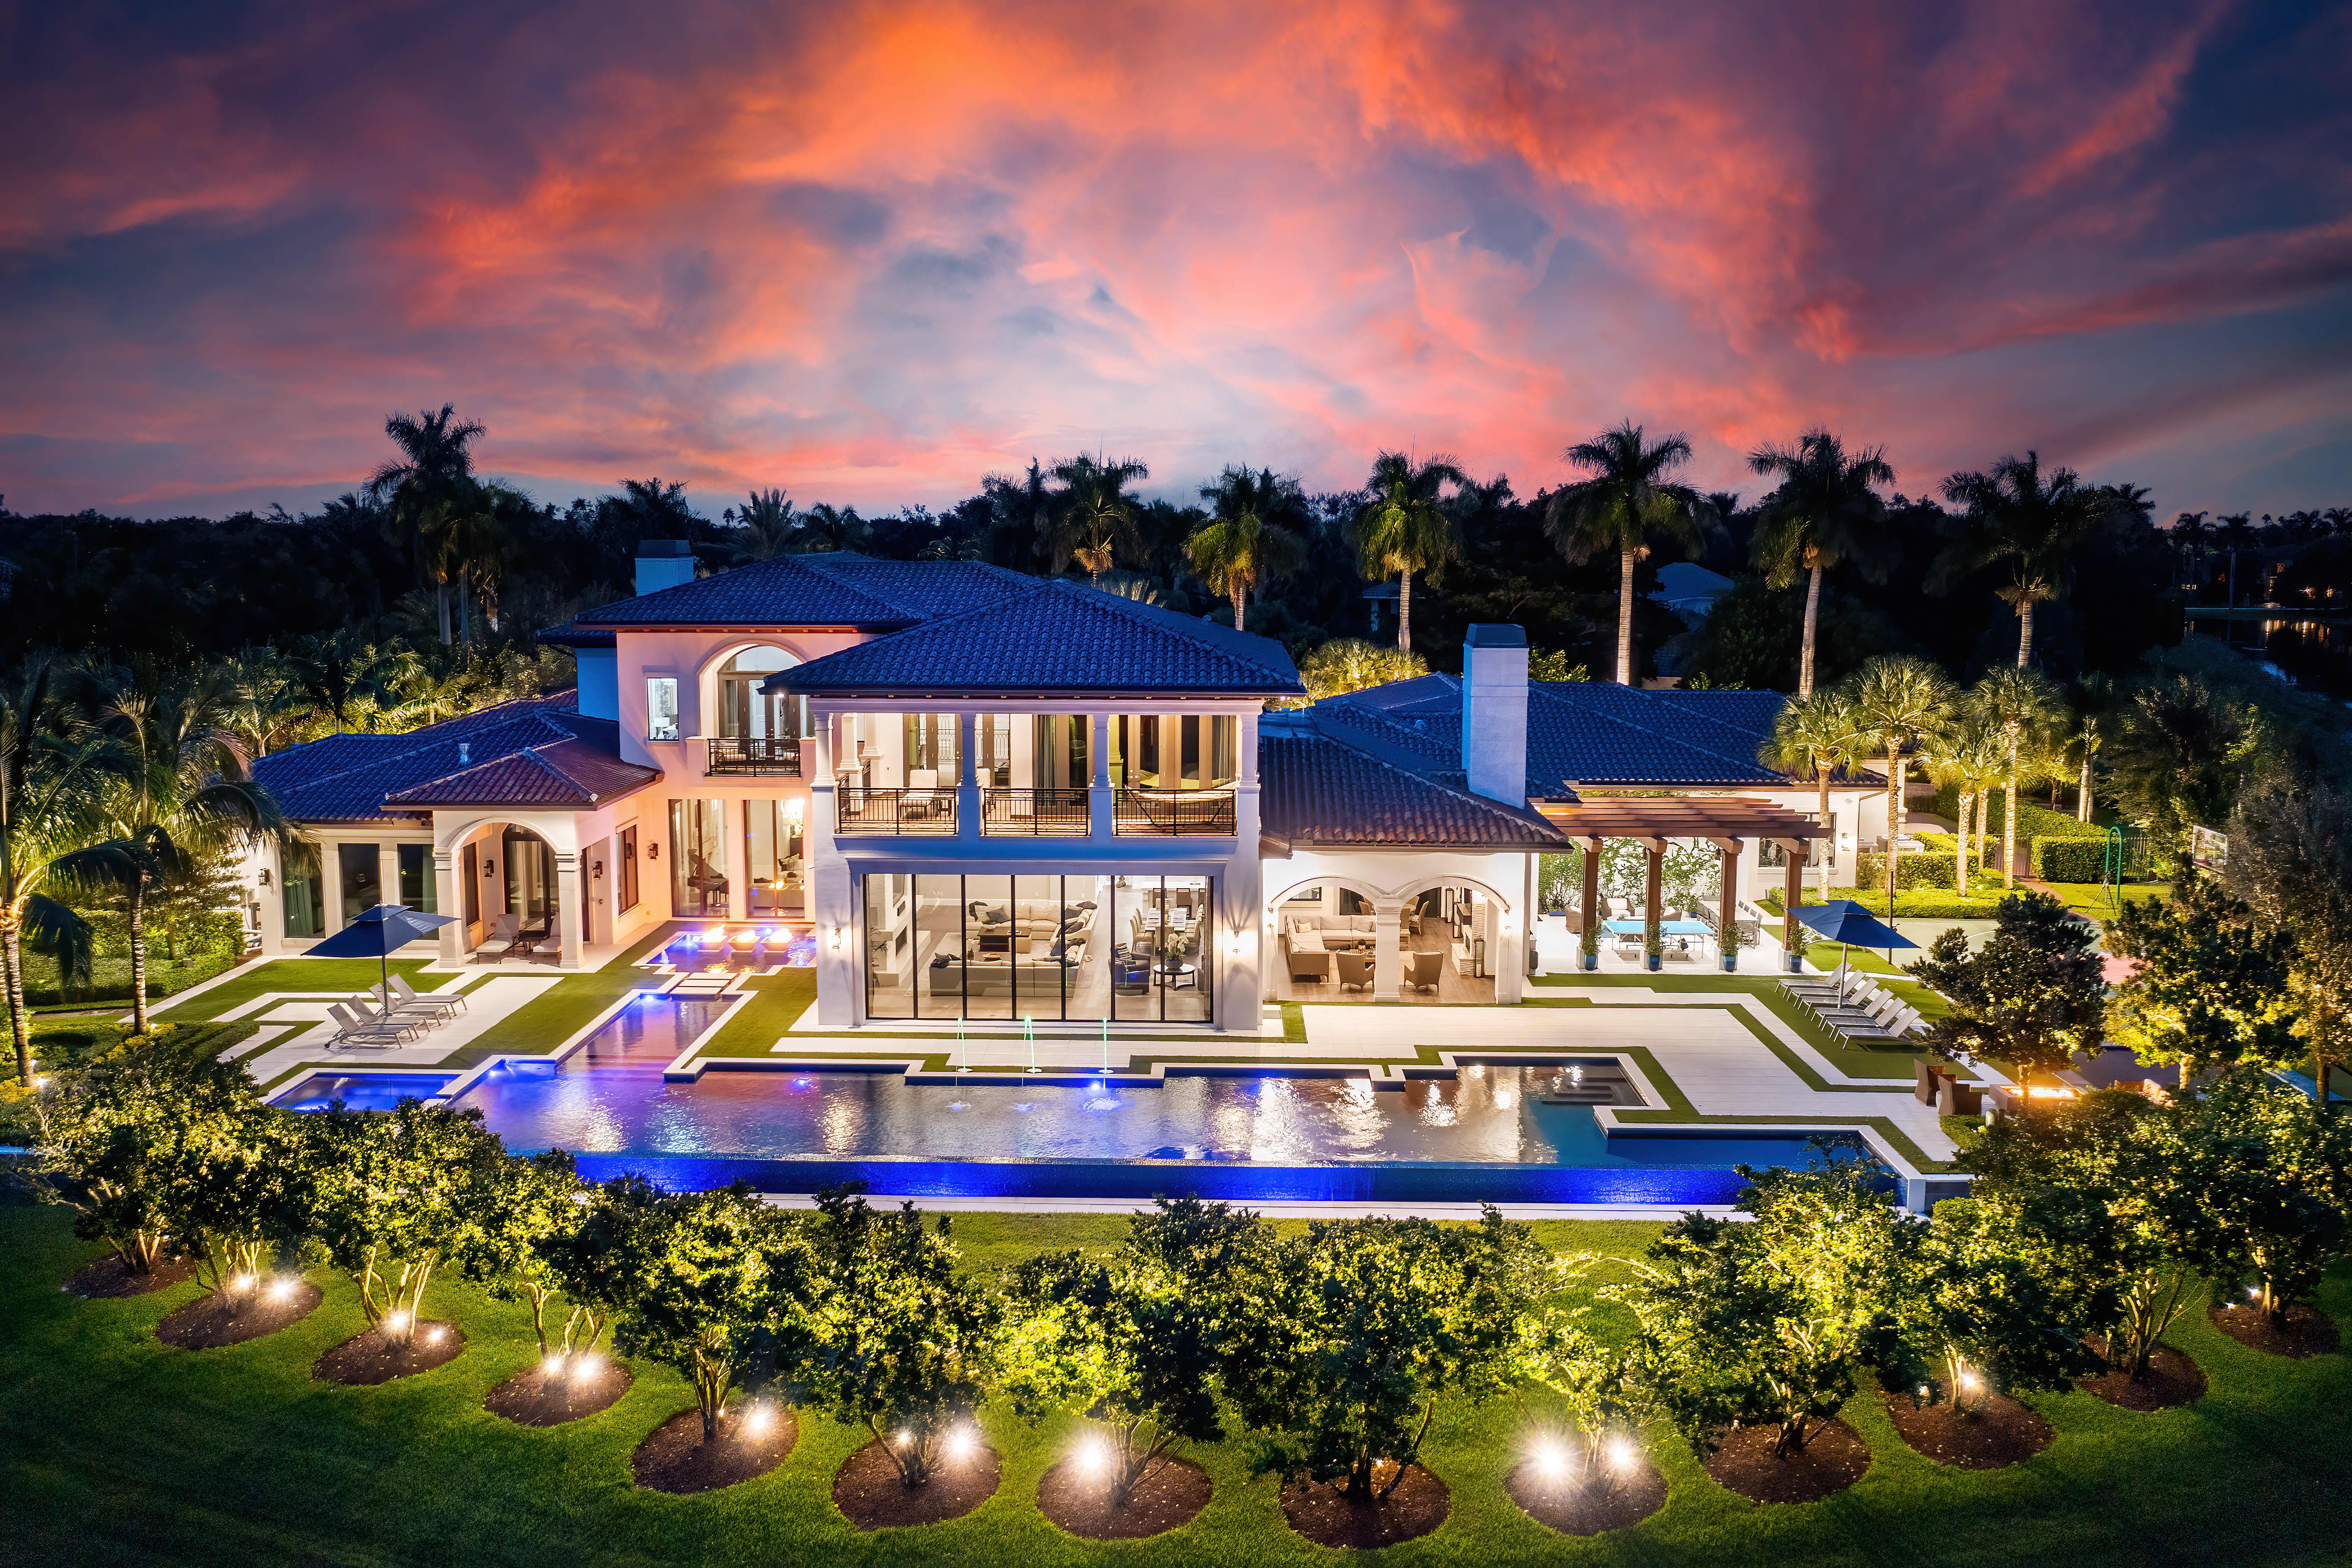 A peek inside the most expensive home for sale in Weston, Florida